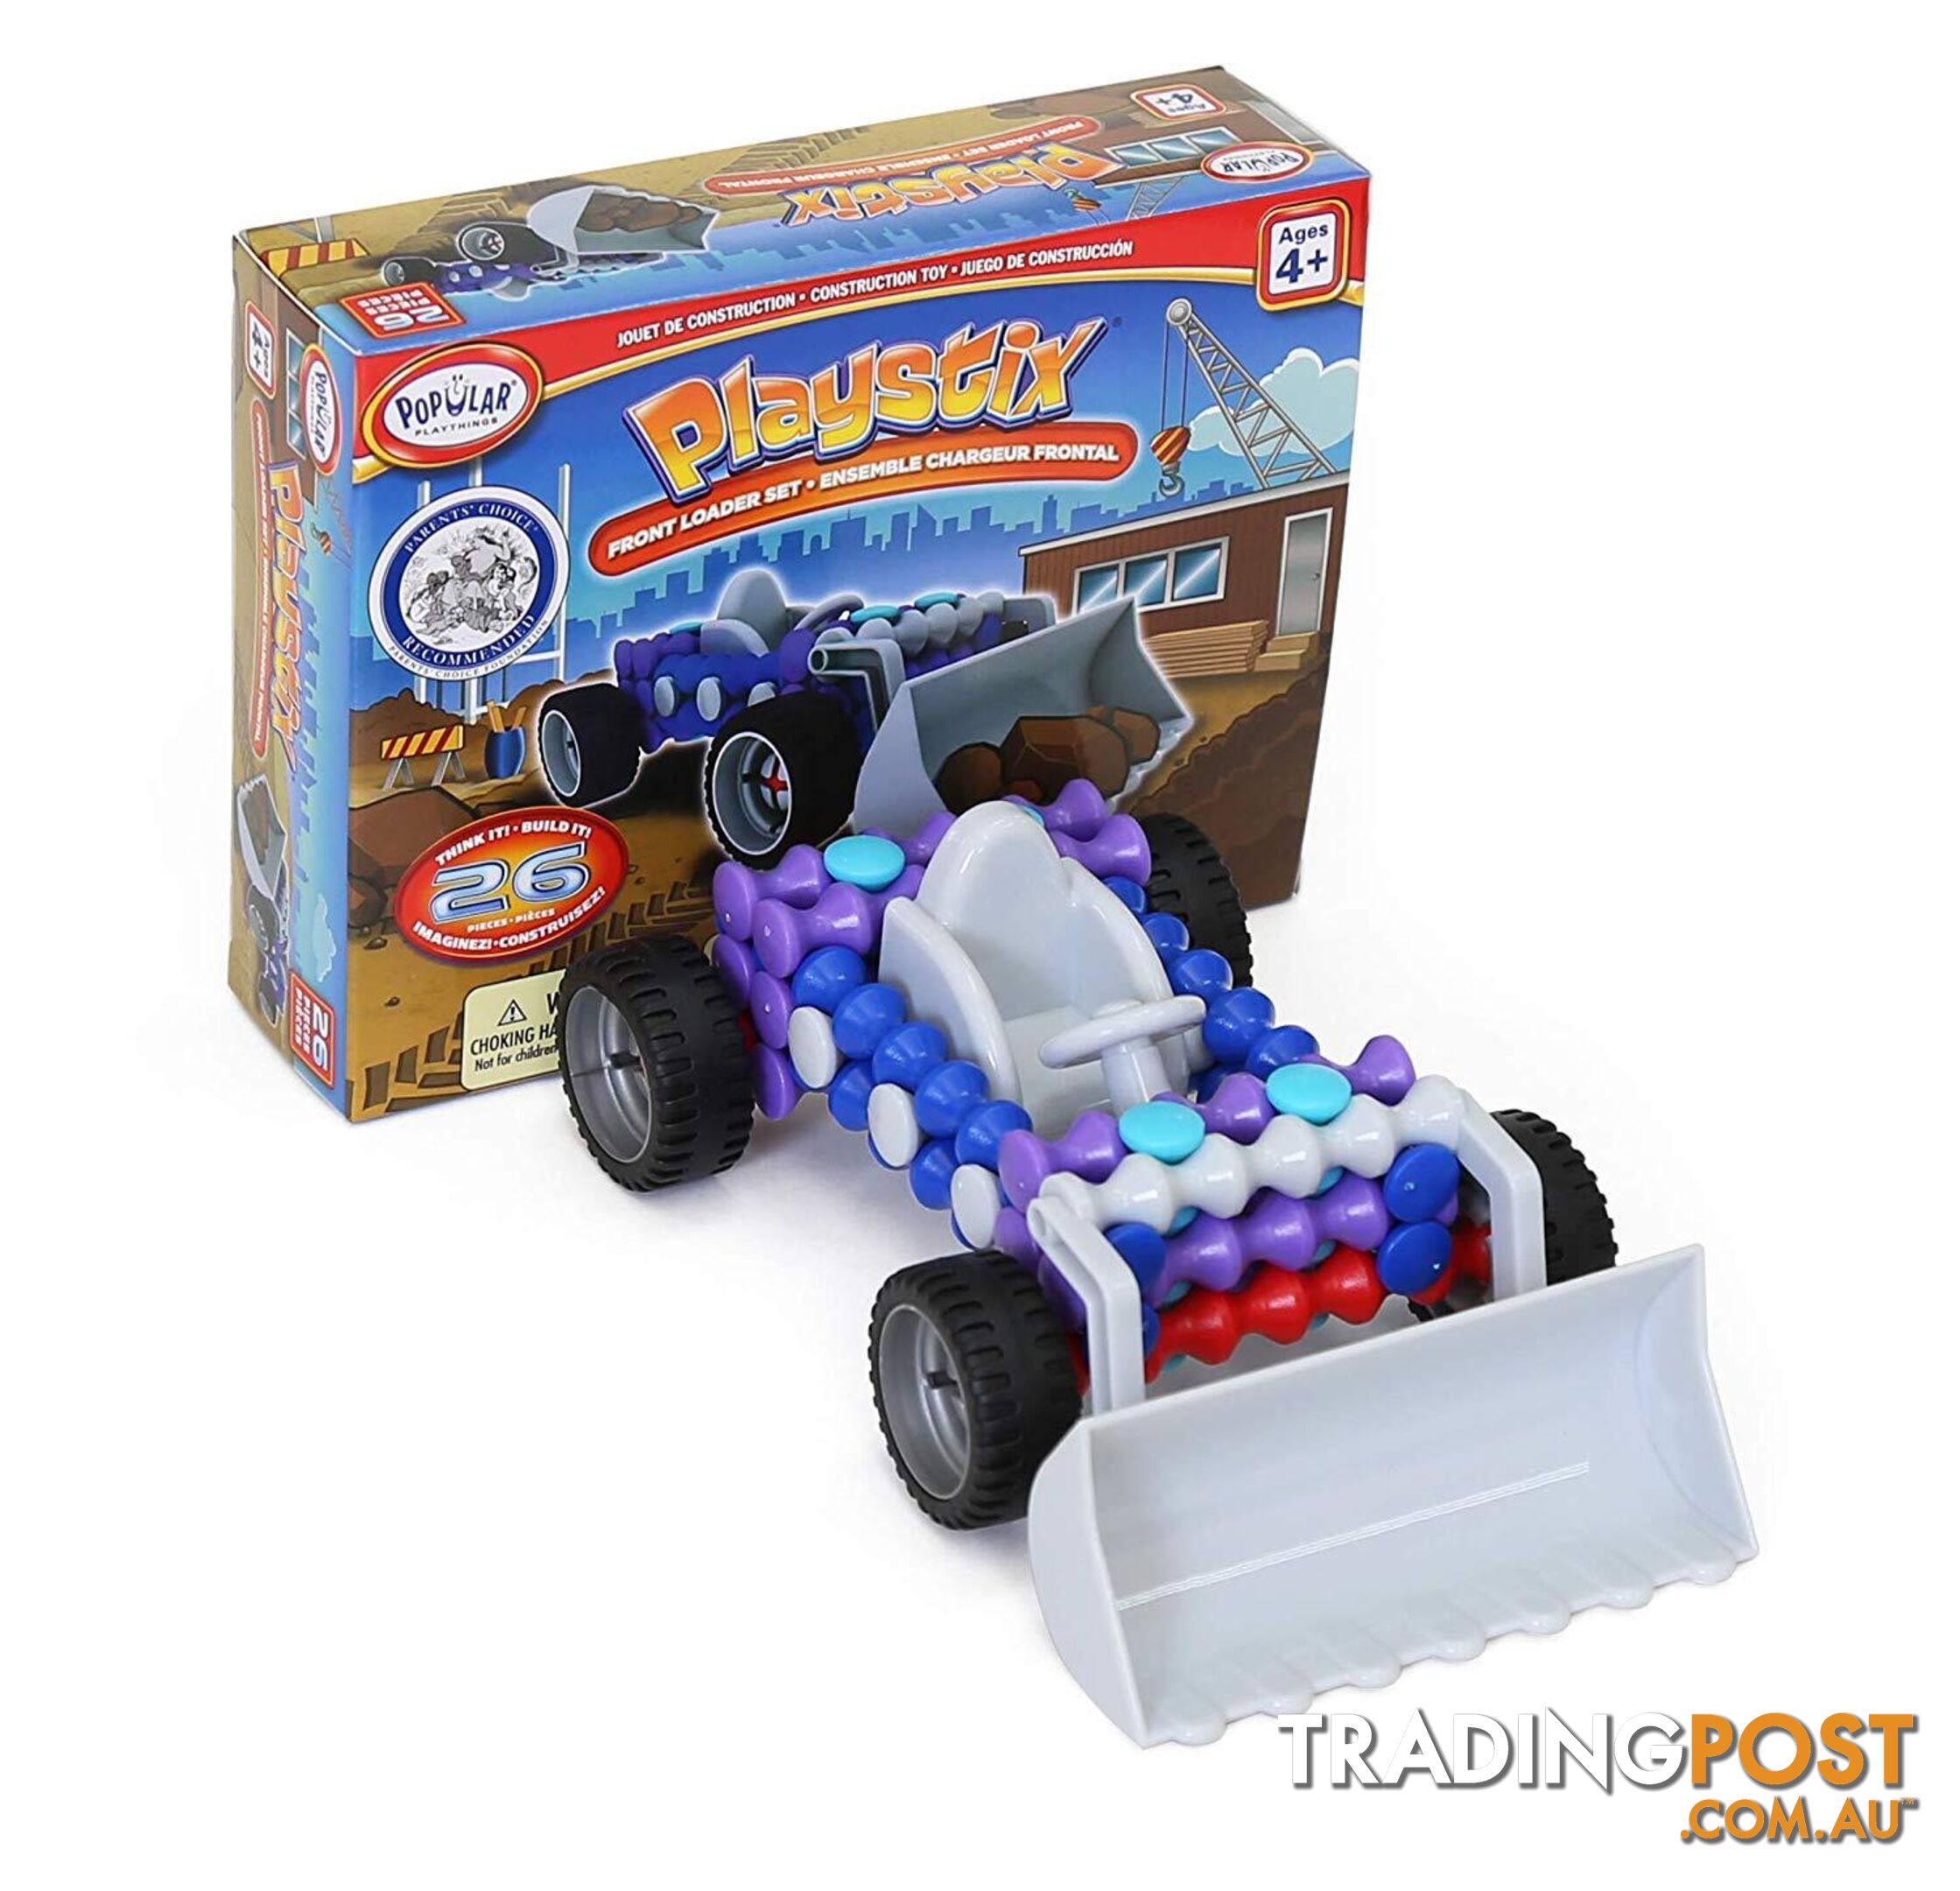 Playstix - Front Loader - Popular Playthings